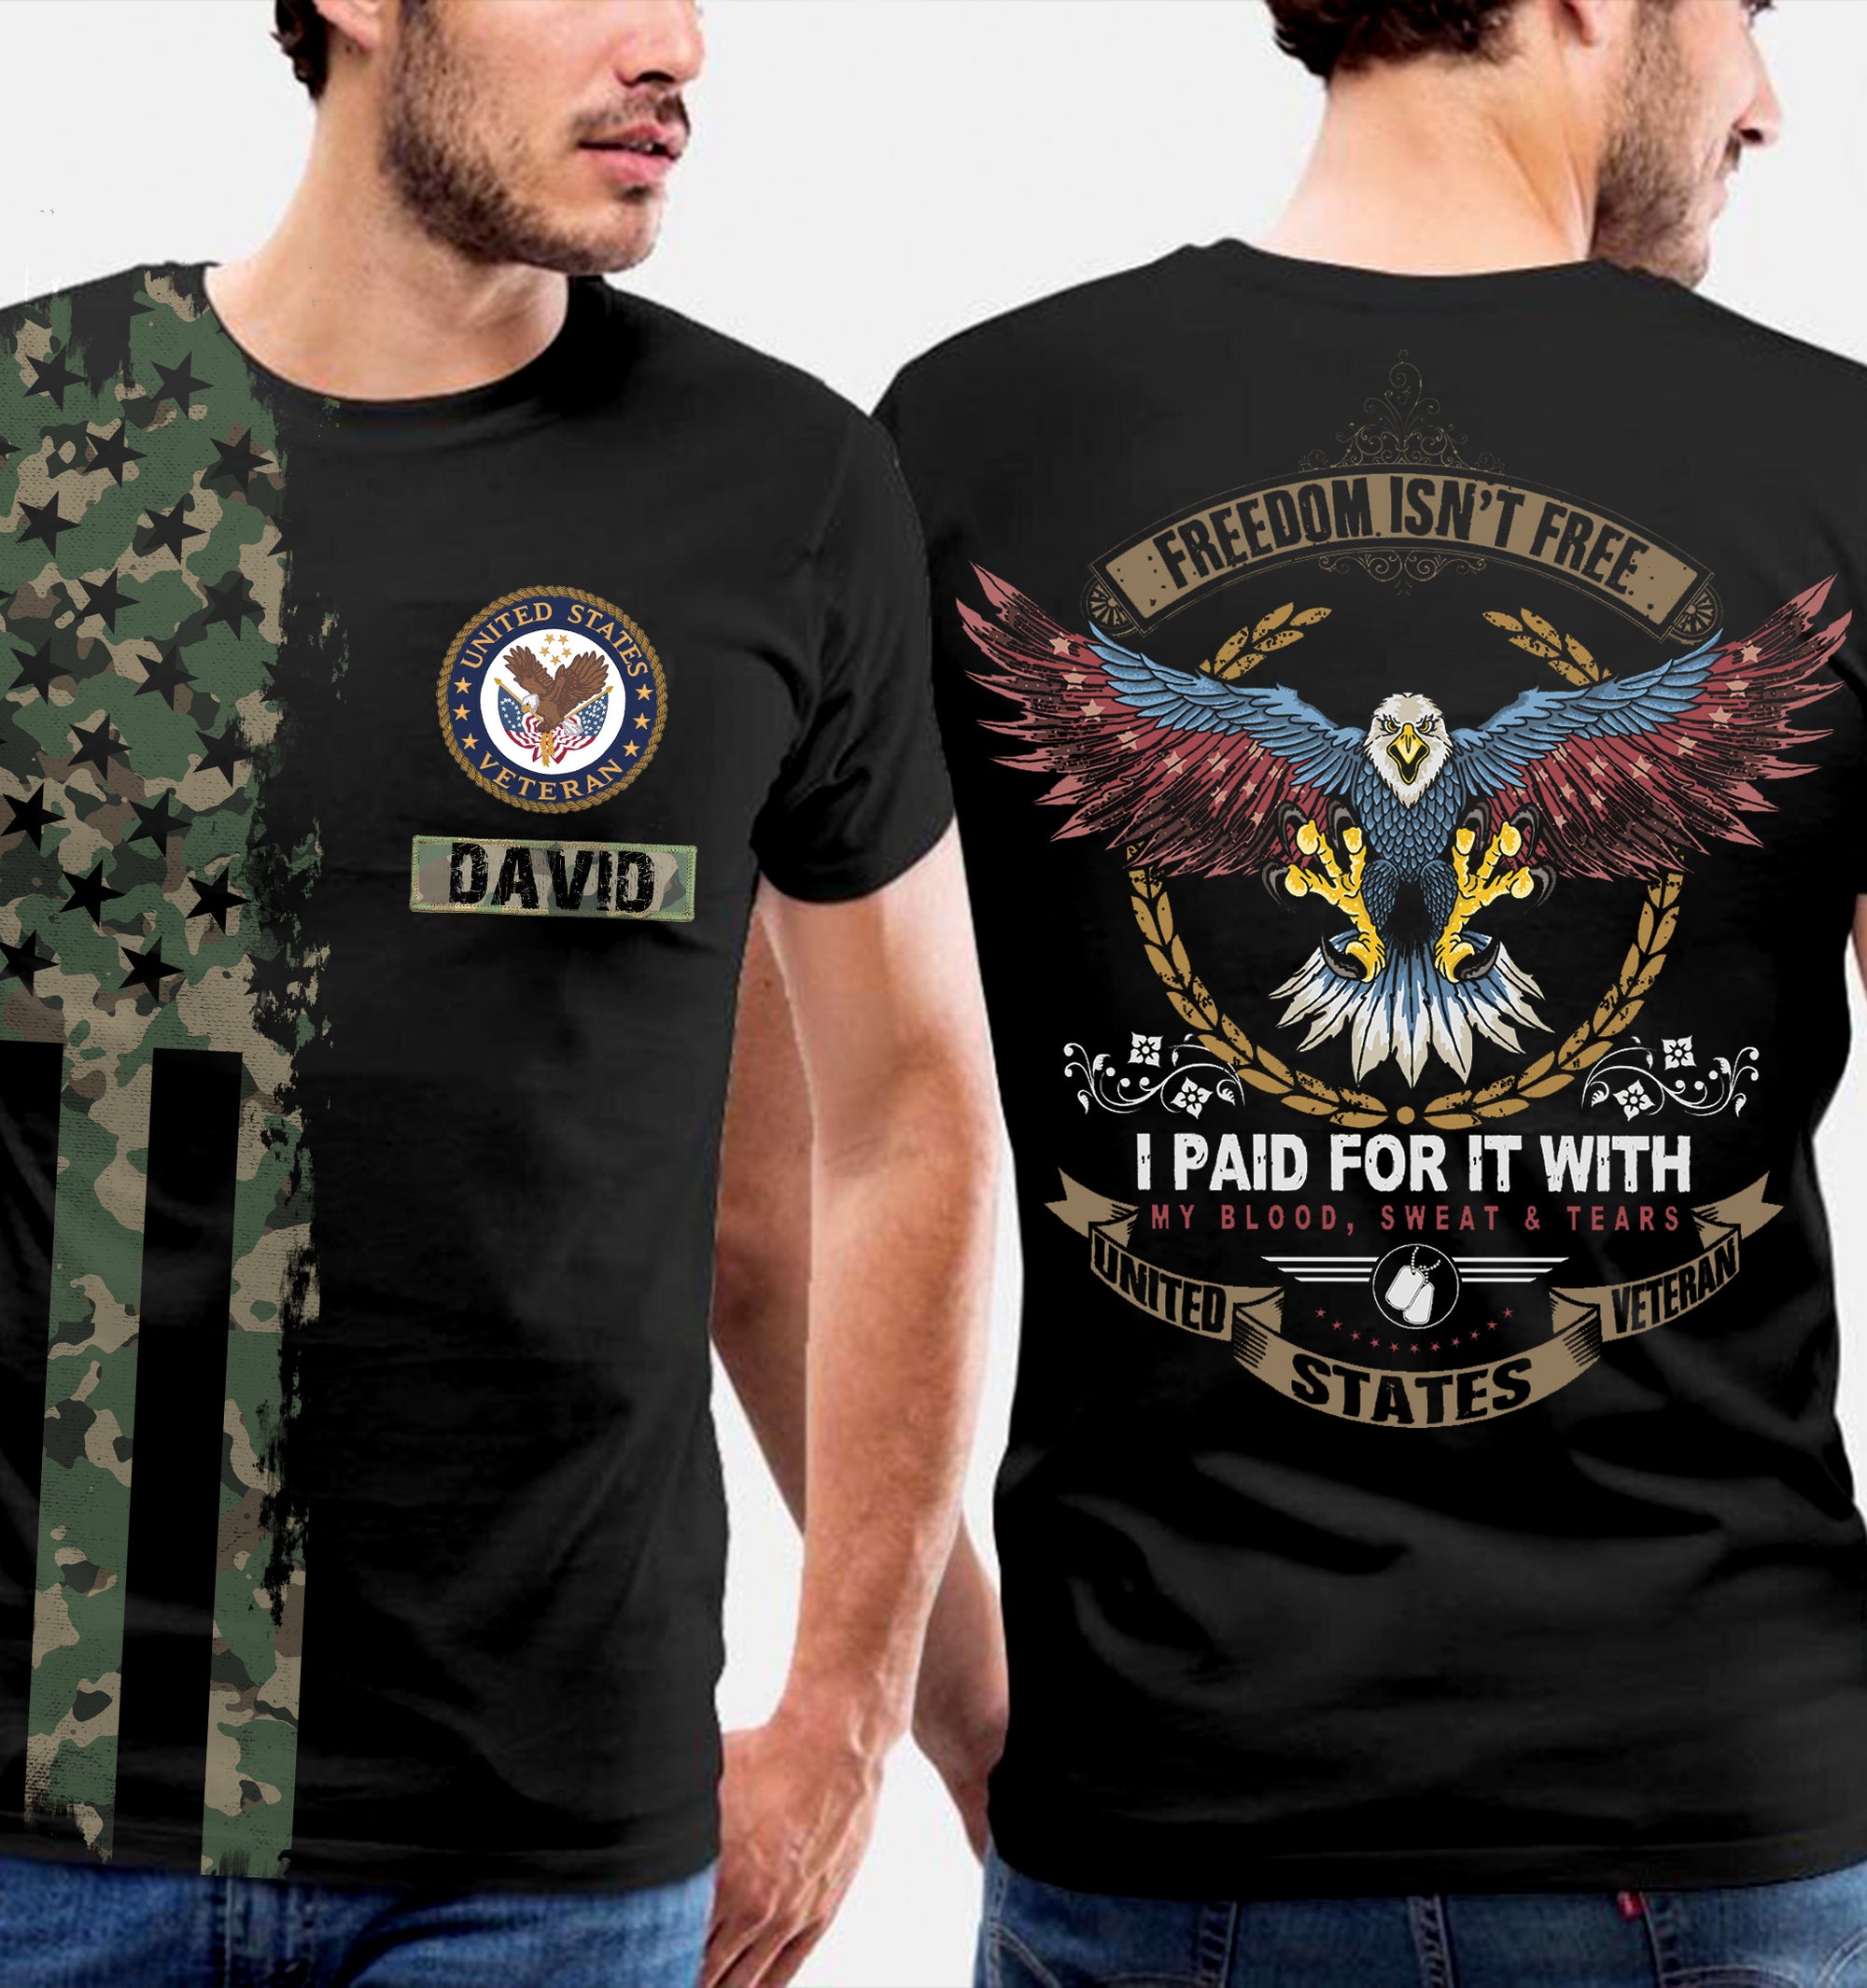 Freedom Is Not Free - I Paid For It With My Blood, Sweat And Tears - Personalized Veteran T-Shirt, Gift For Veterans